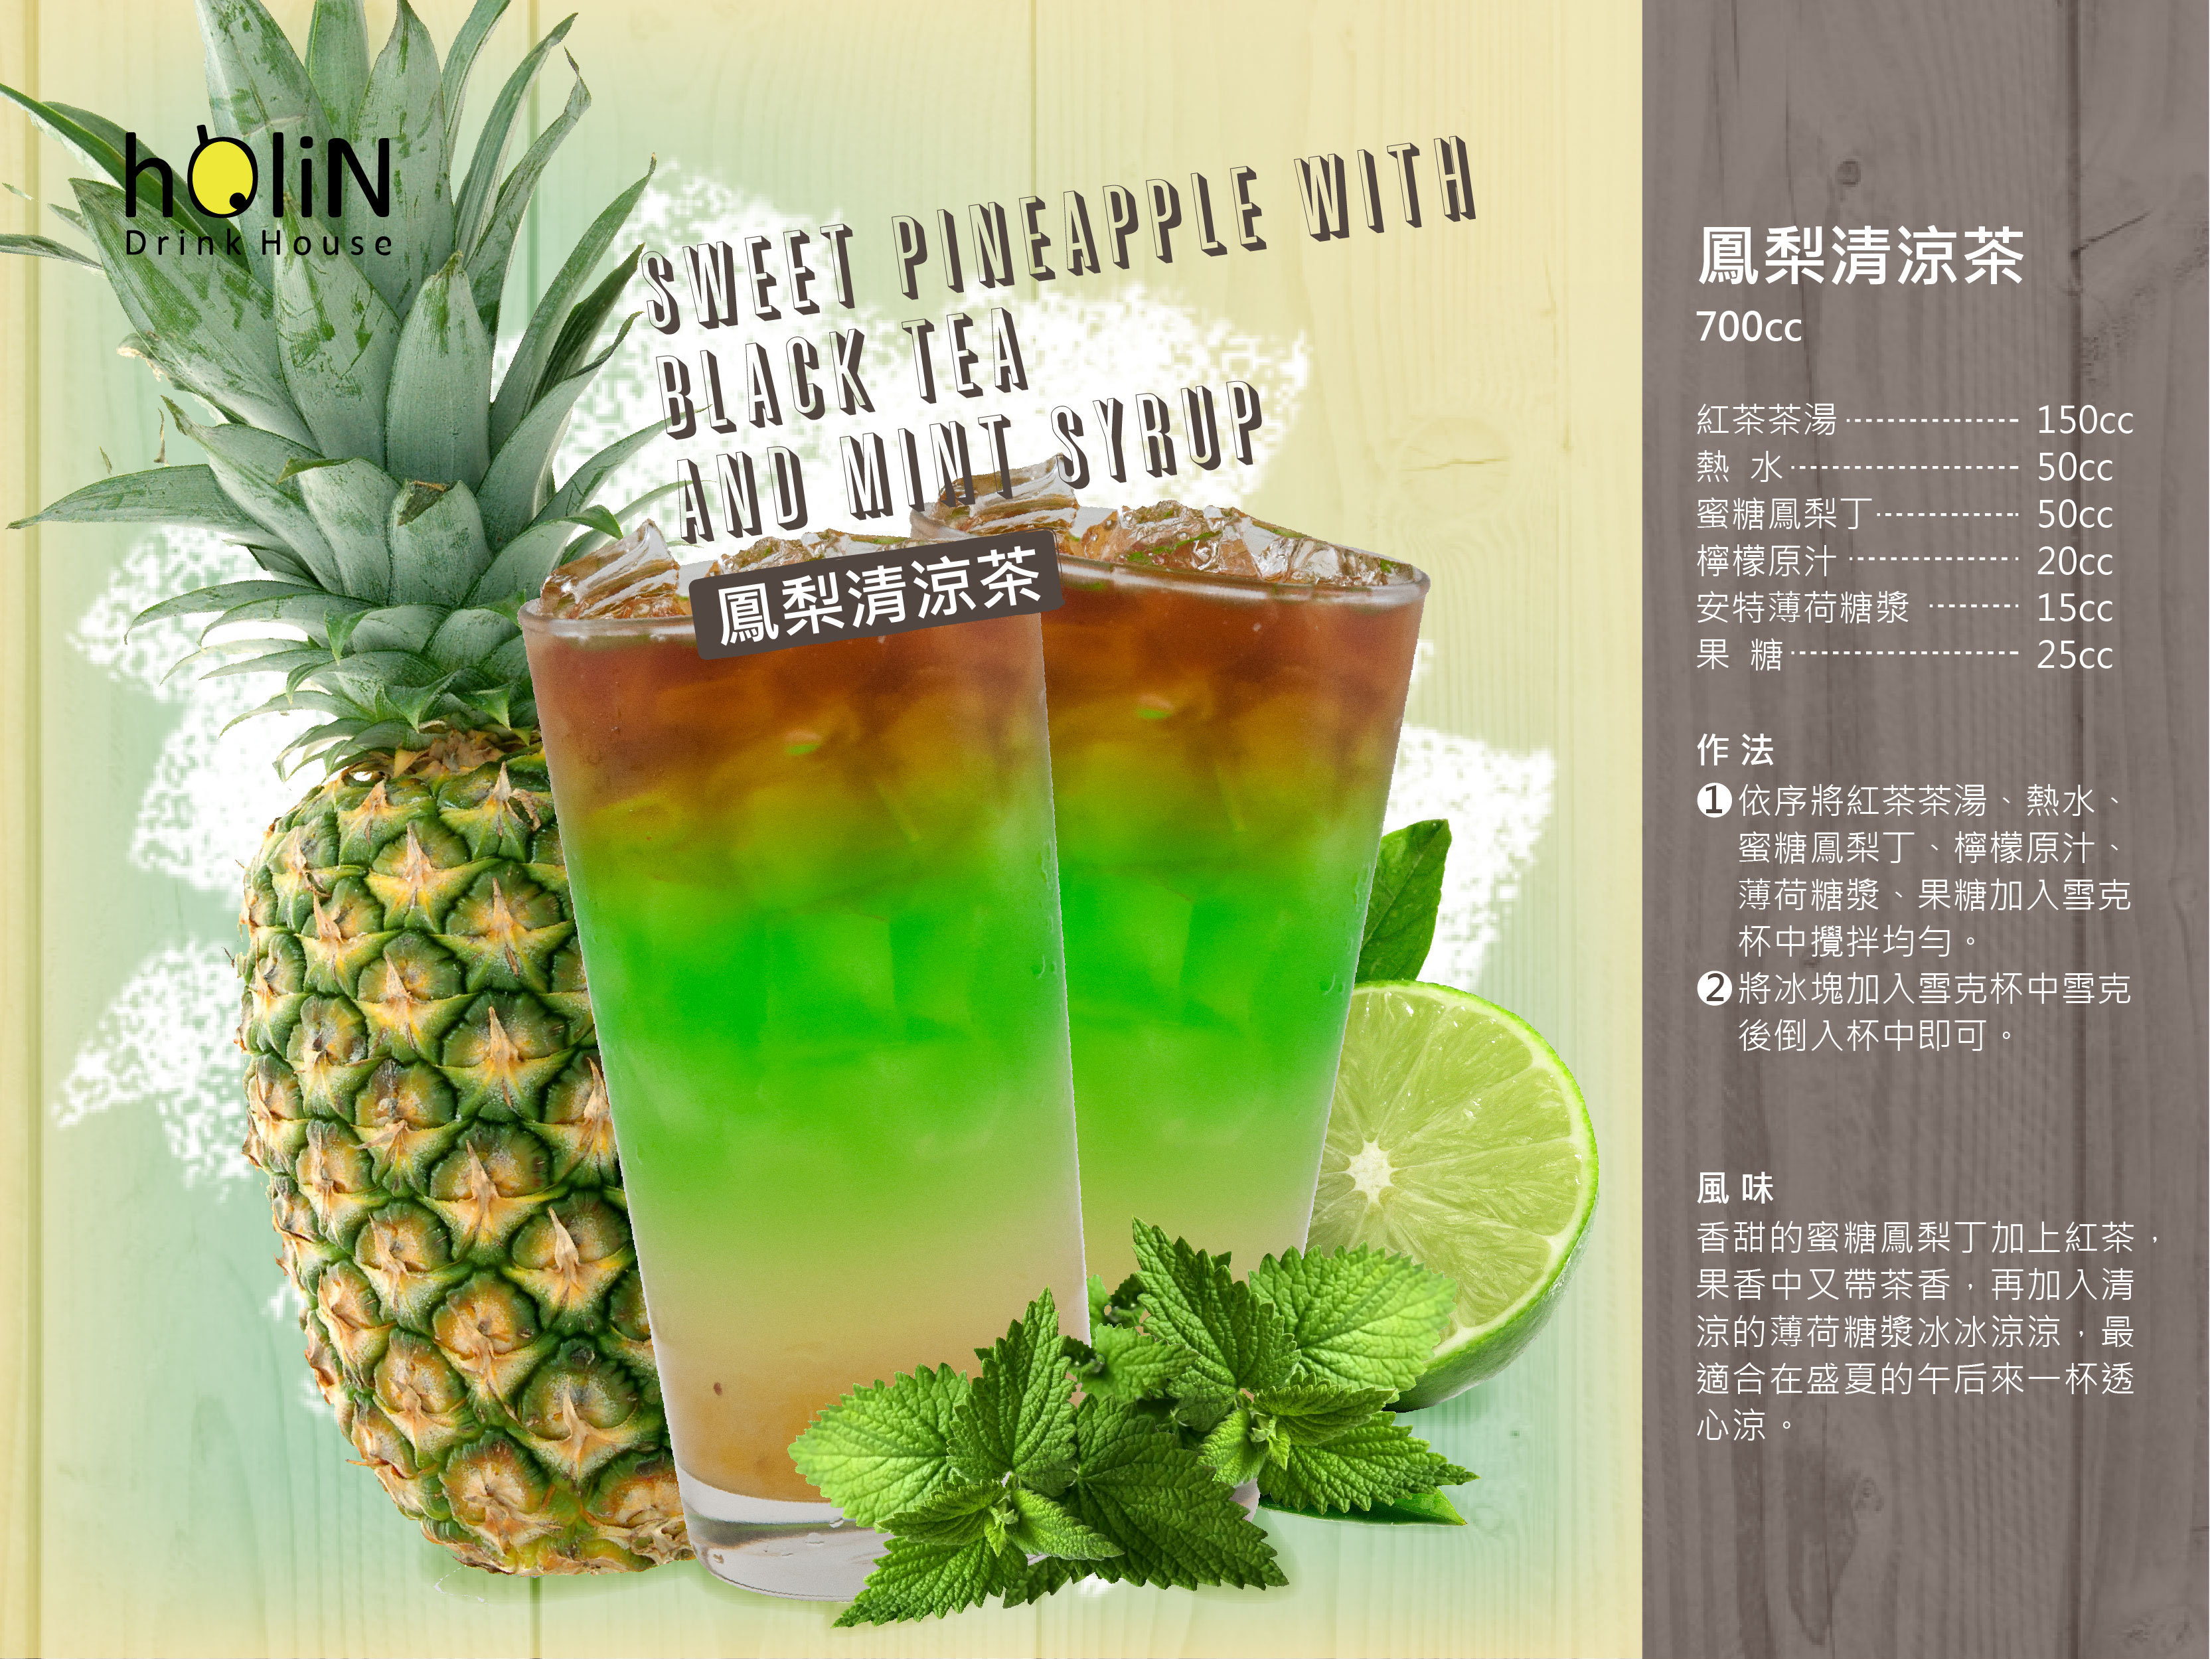 Sweet Pineapple with Black Tea and Mint Syrup